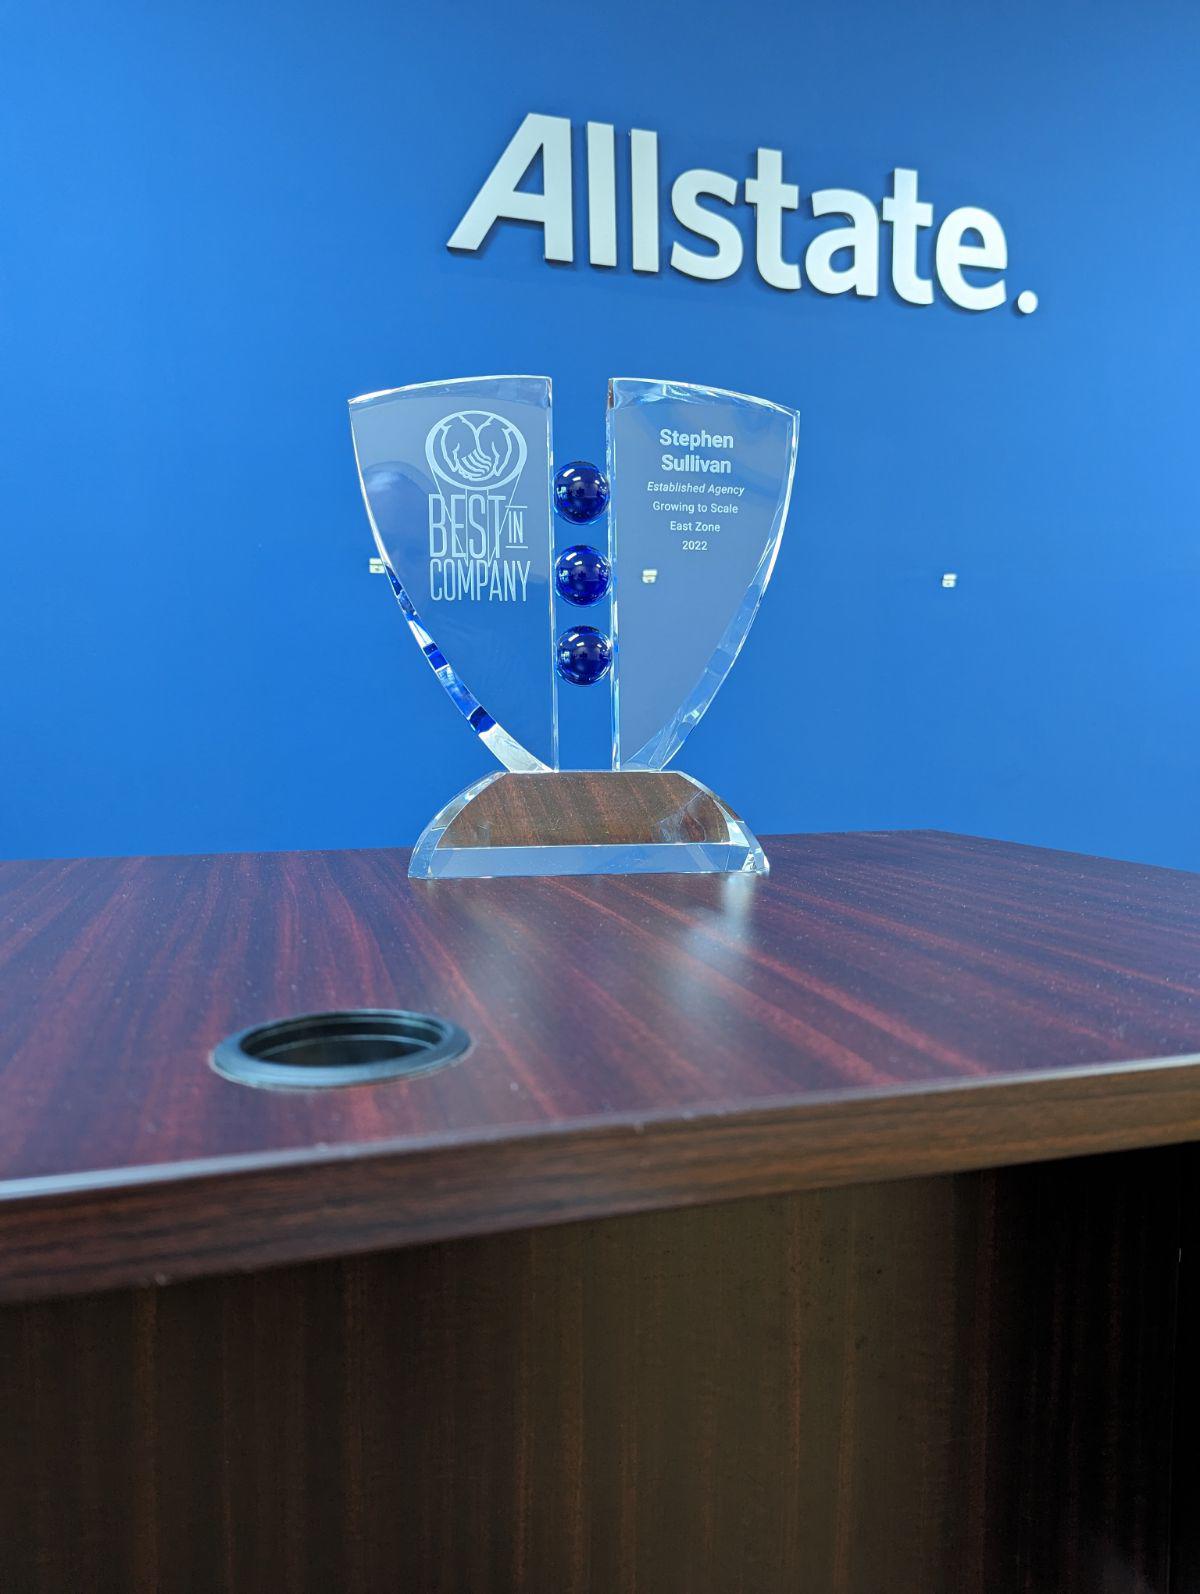 Allstate Best in Company 2022